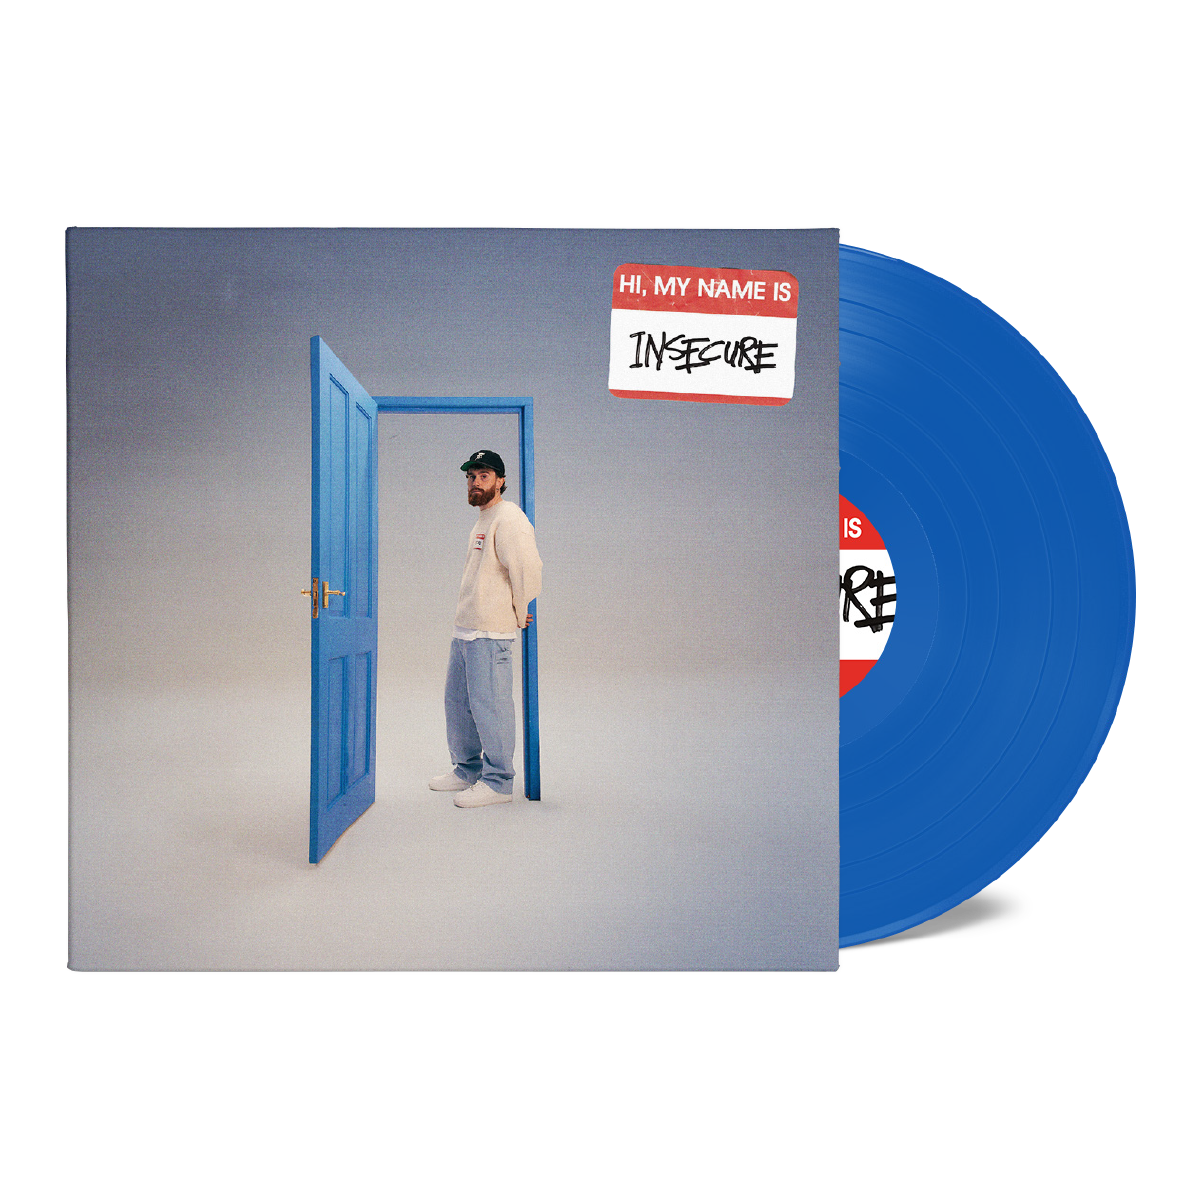 hi, my name is insecure - Blue Vinyl, Red/White Vinyl & Signed Art Card